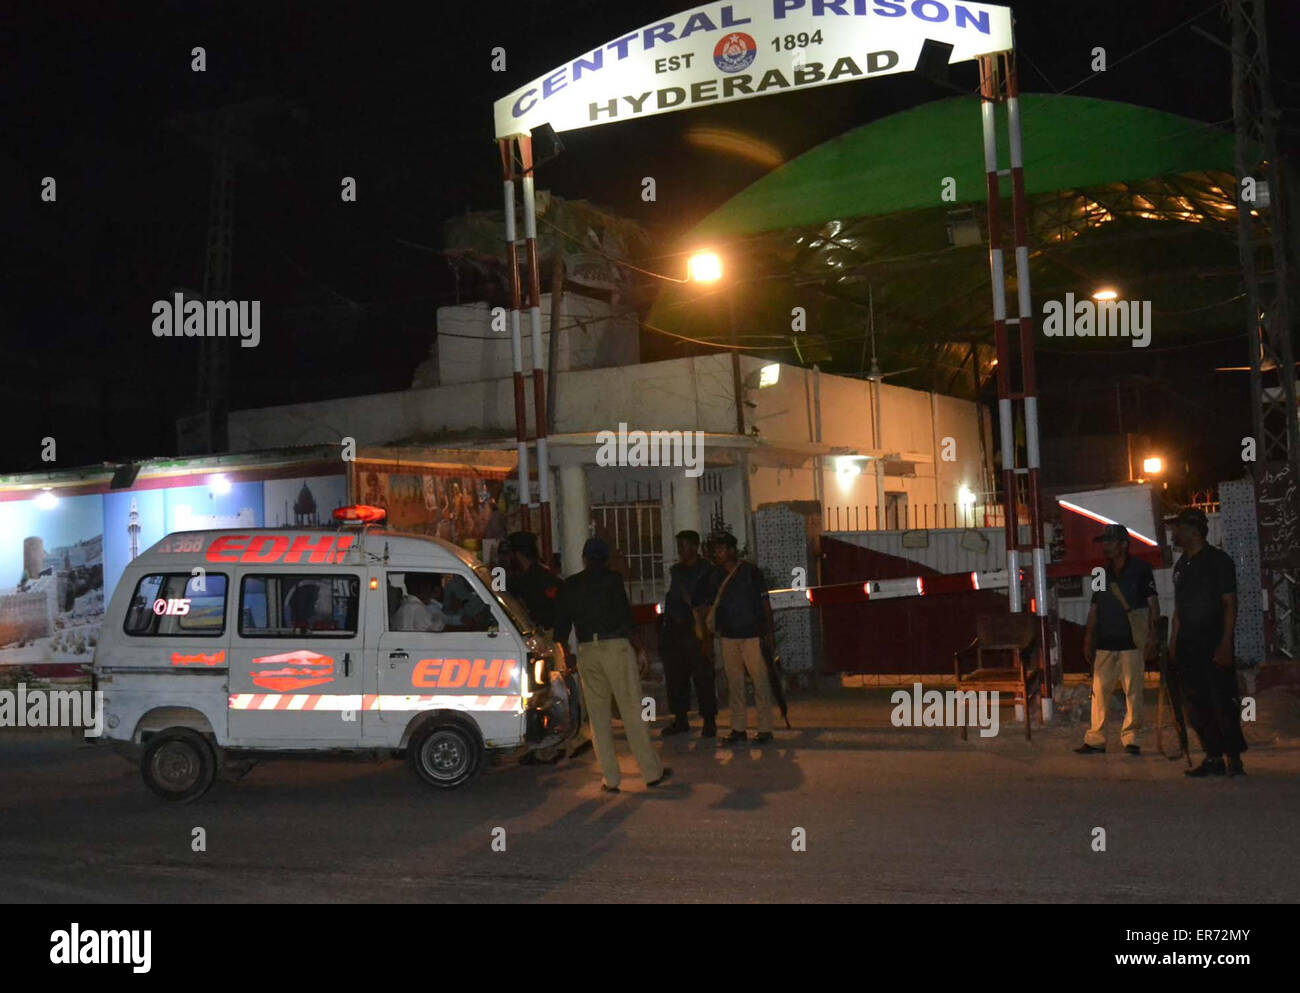 Ambulance getting entered to receive dead bodies of hanged criminal Sabir Baloch and Shahsawar Baloch alleged in hijacking of PIA aircraft in 1998, at Central Jail Hyderabad on Thursday, May 28, 2015. Stock Photo